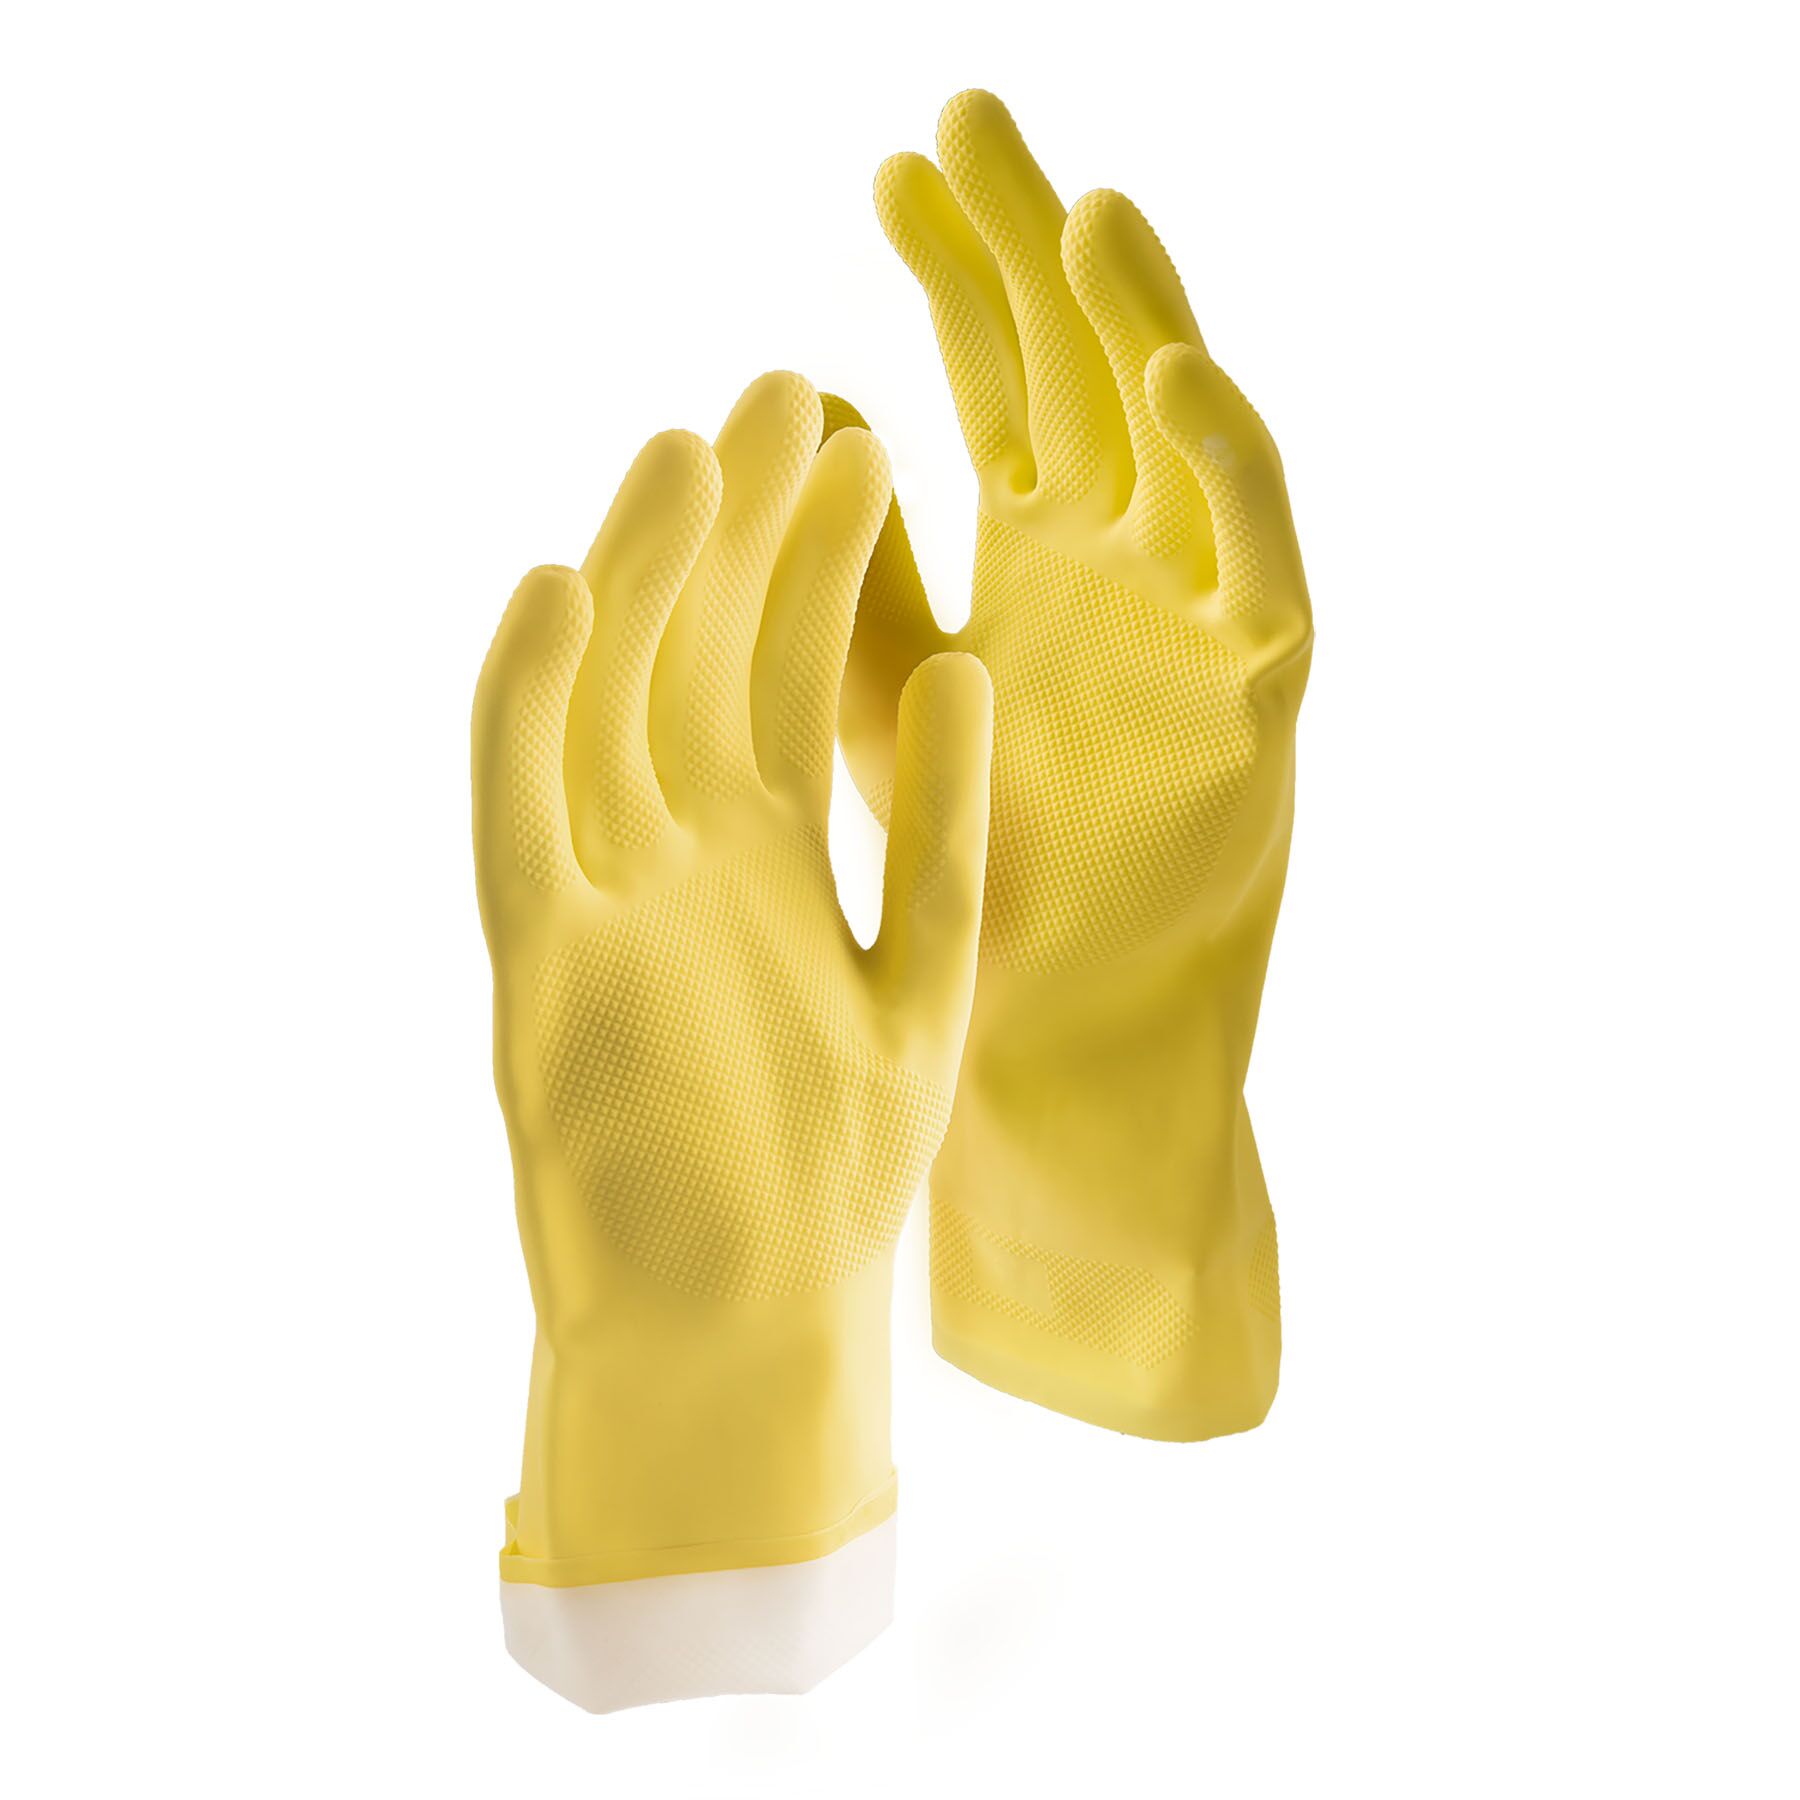 All Purpose Latex Gloves - 2 Pack